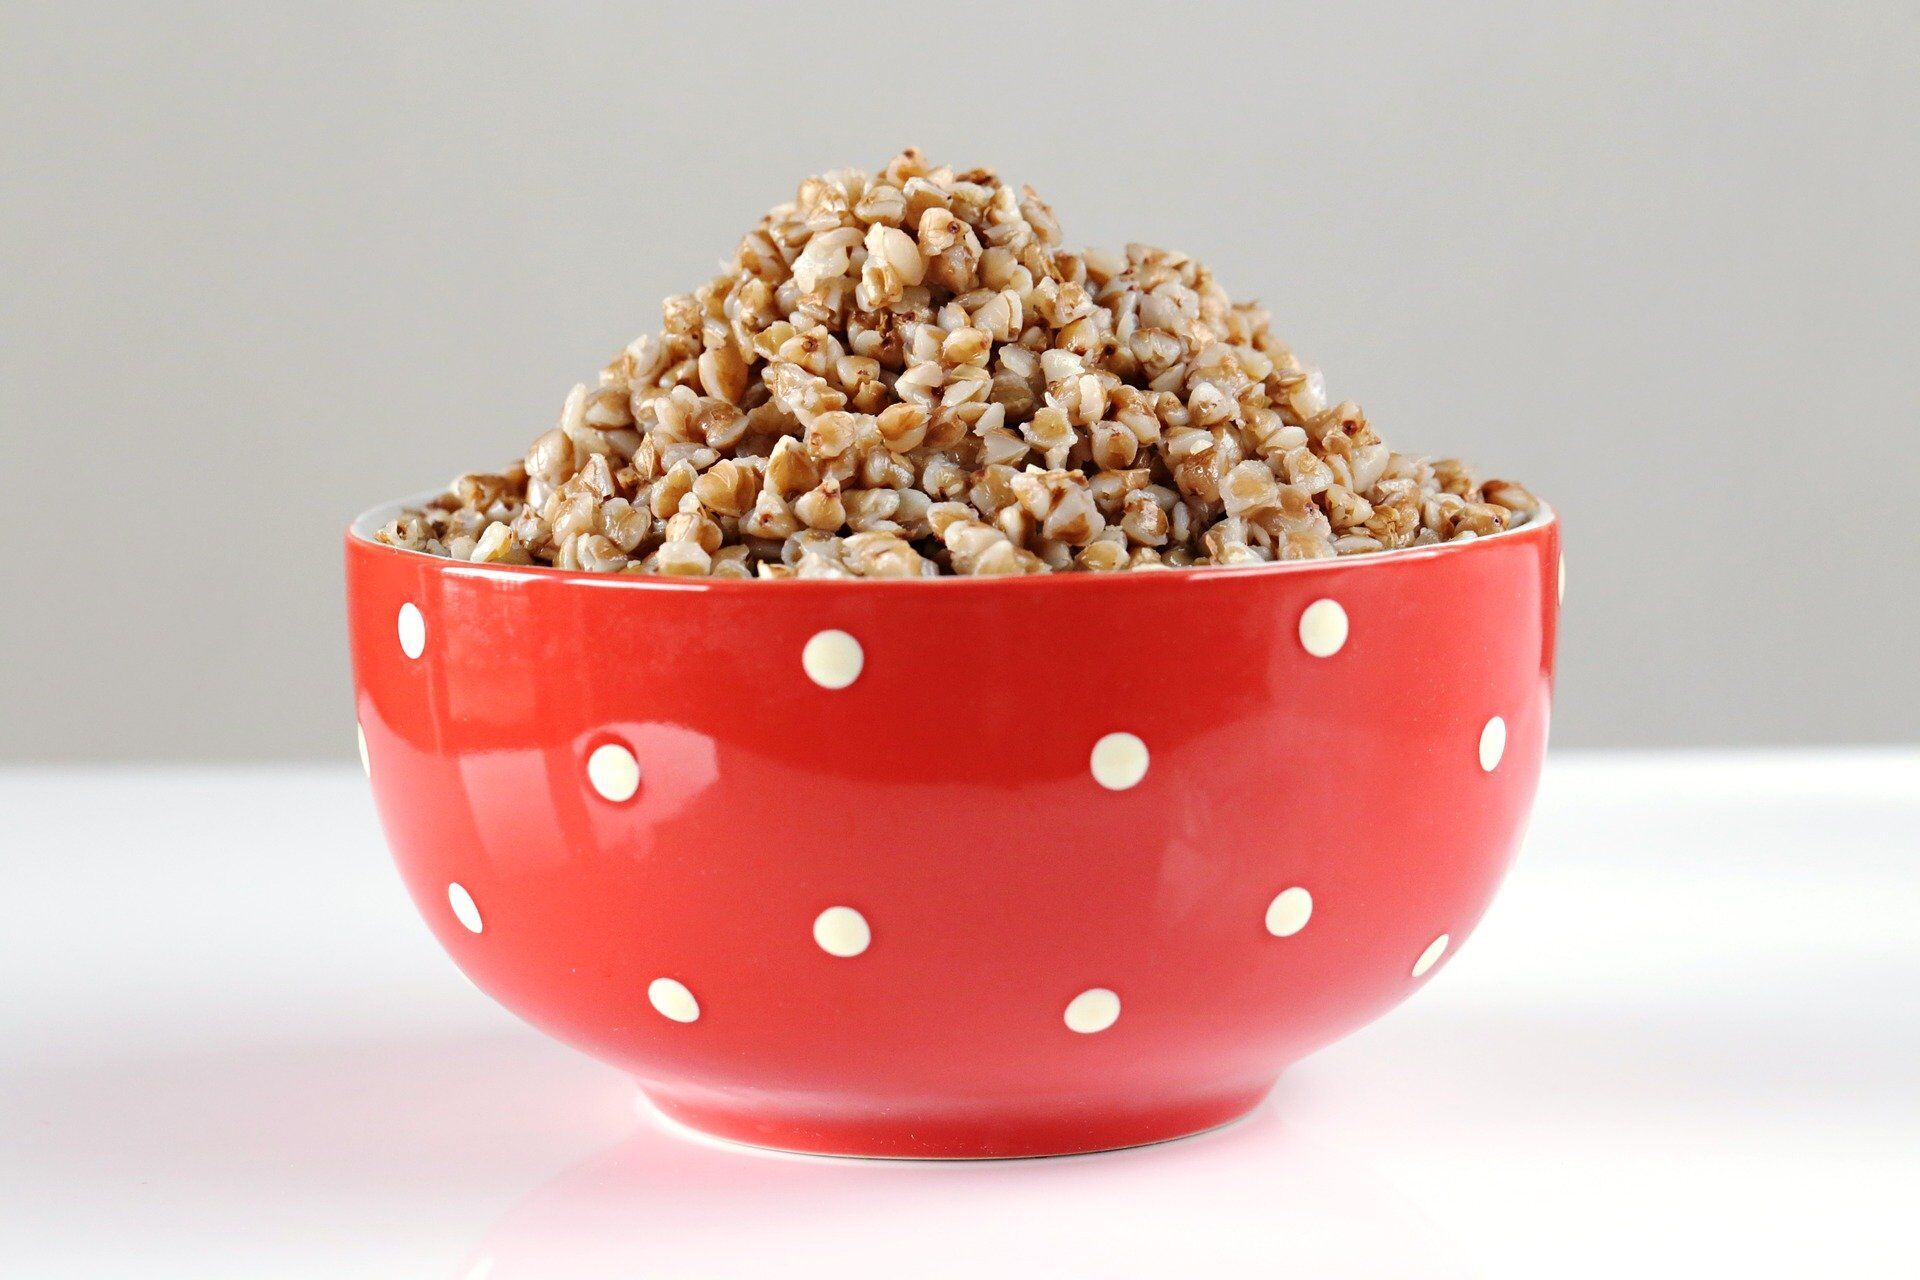 Buckwheat can be eaten for breakfast, lunch and dinner